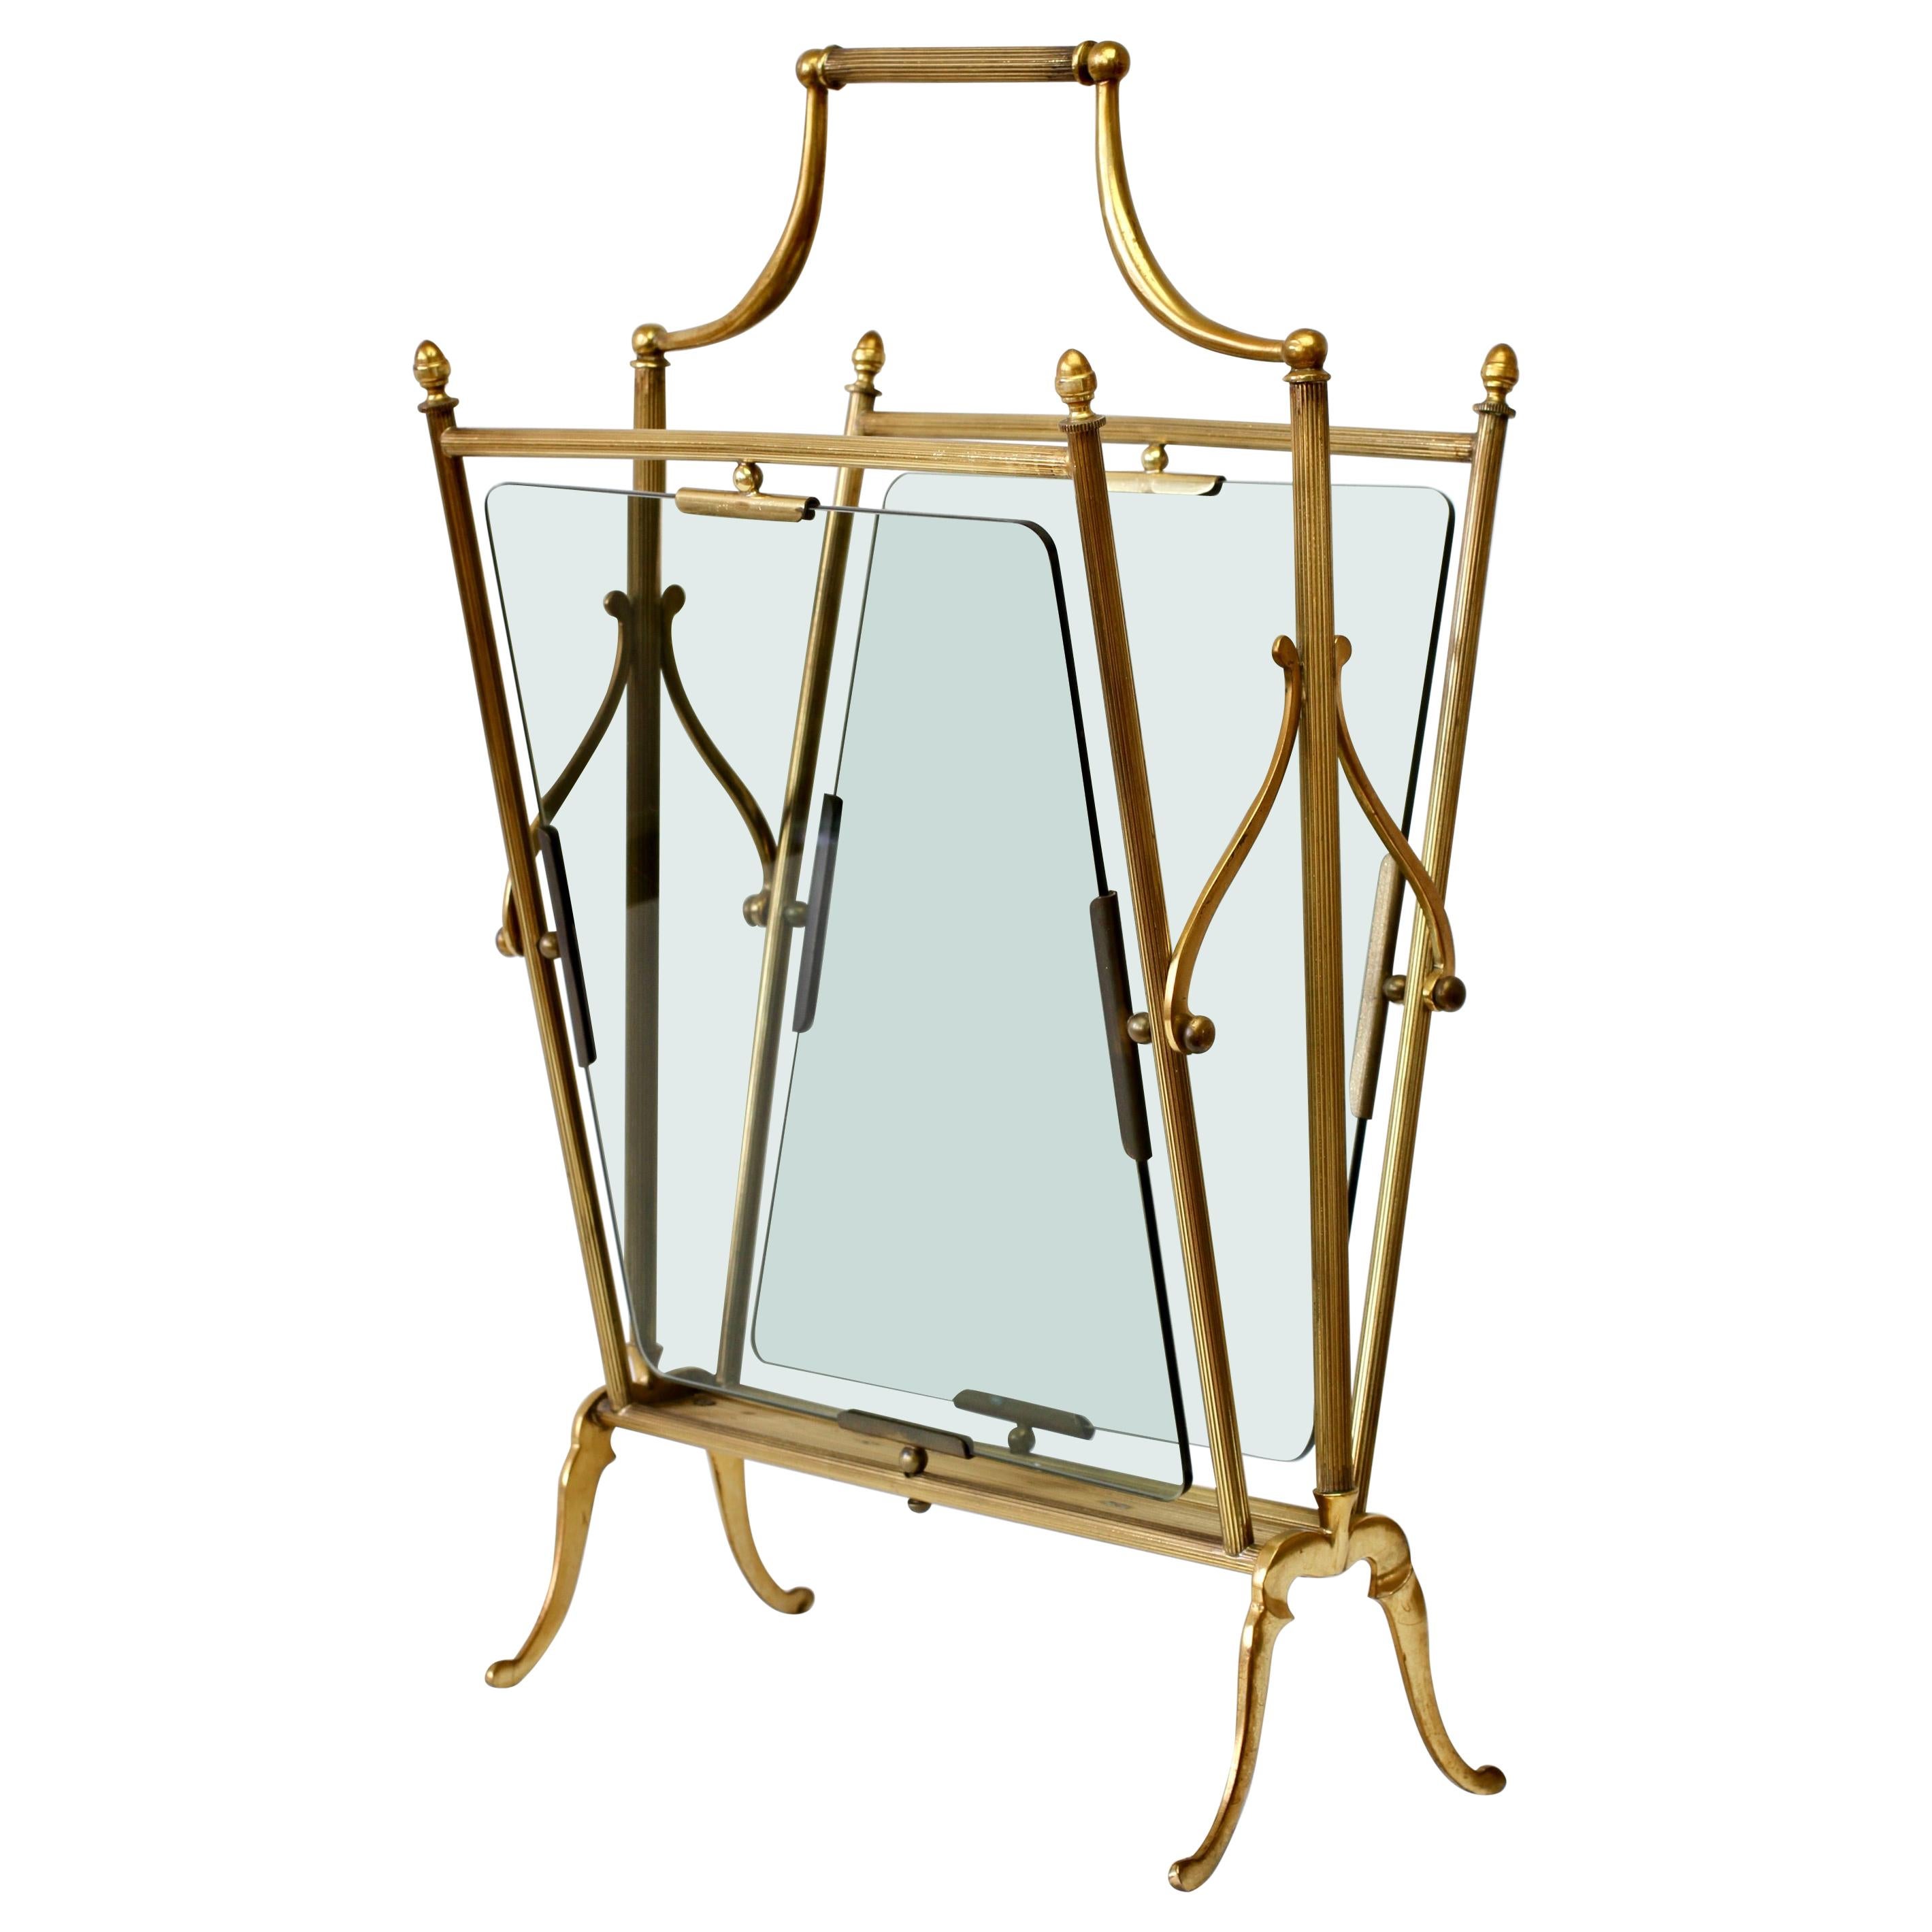 Maison Baguès ‘Attributed' Brass & Toned Glass Magazine Rack / Newspaper Stand For Sale